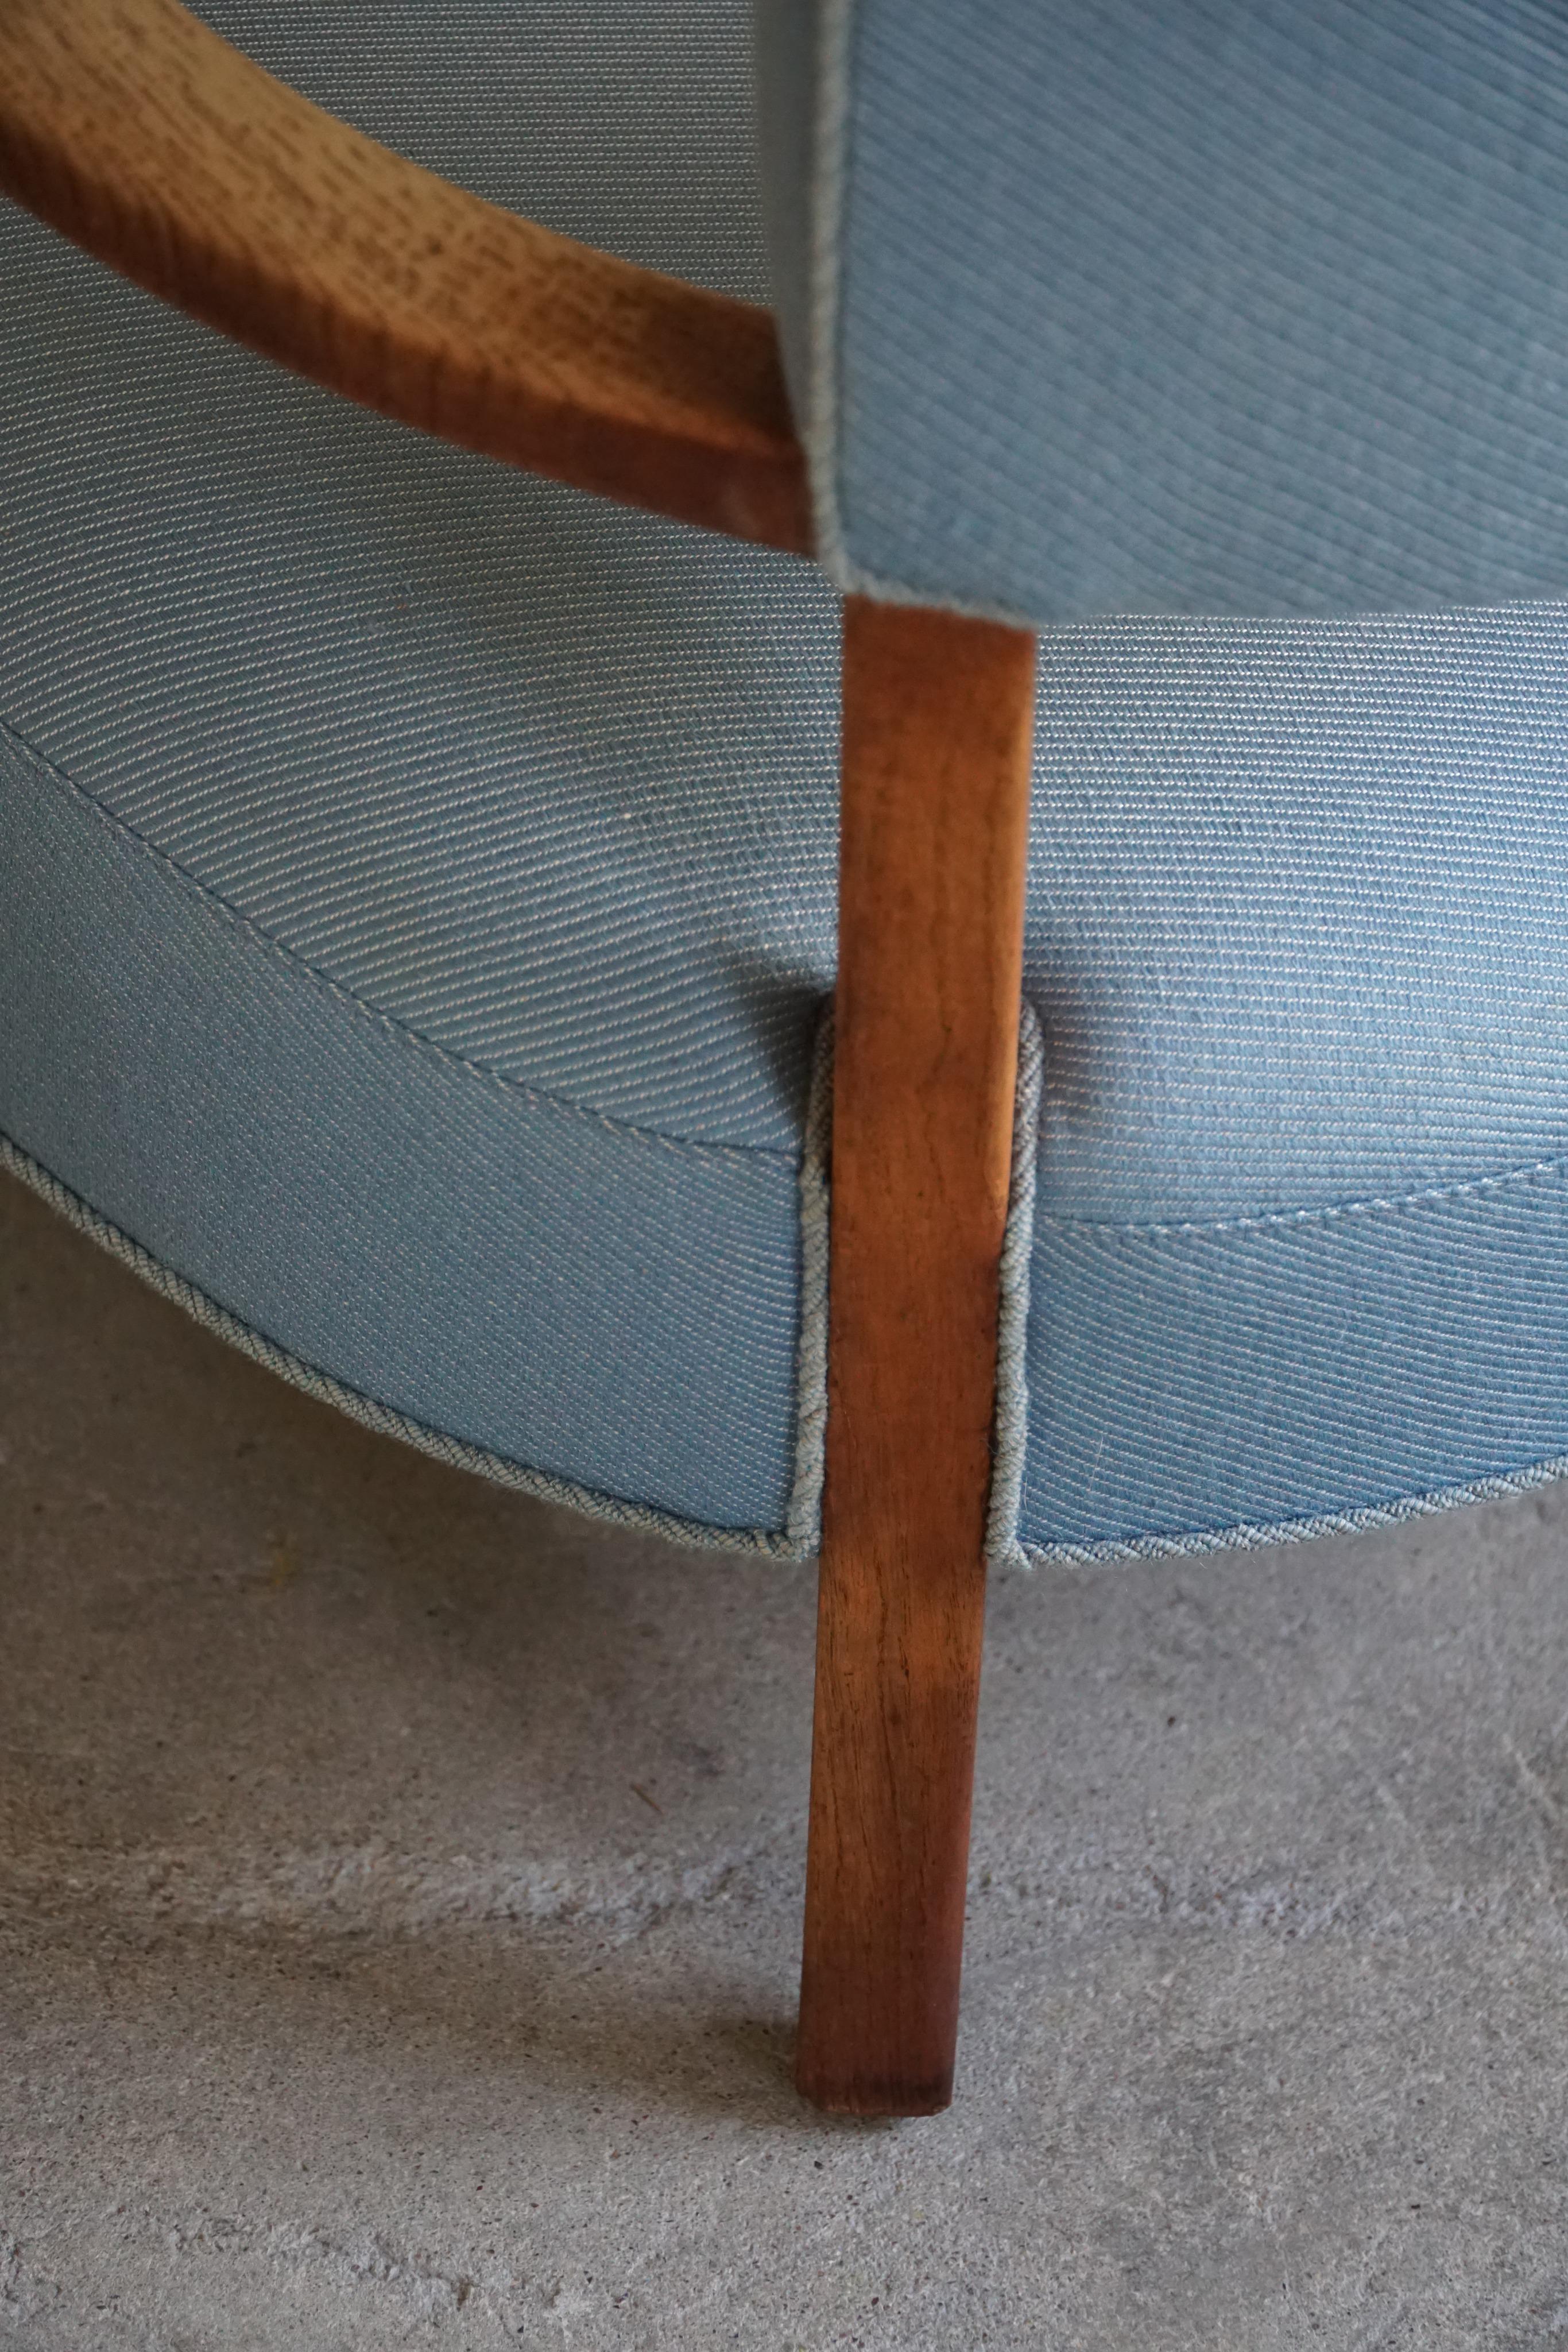 Danish Modern, Curved Lounge Chair in Oak, Attributed to Viggo Boesen, 1950s For Sale 9